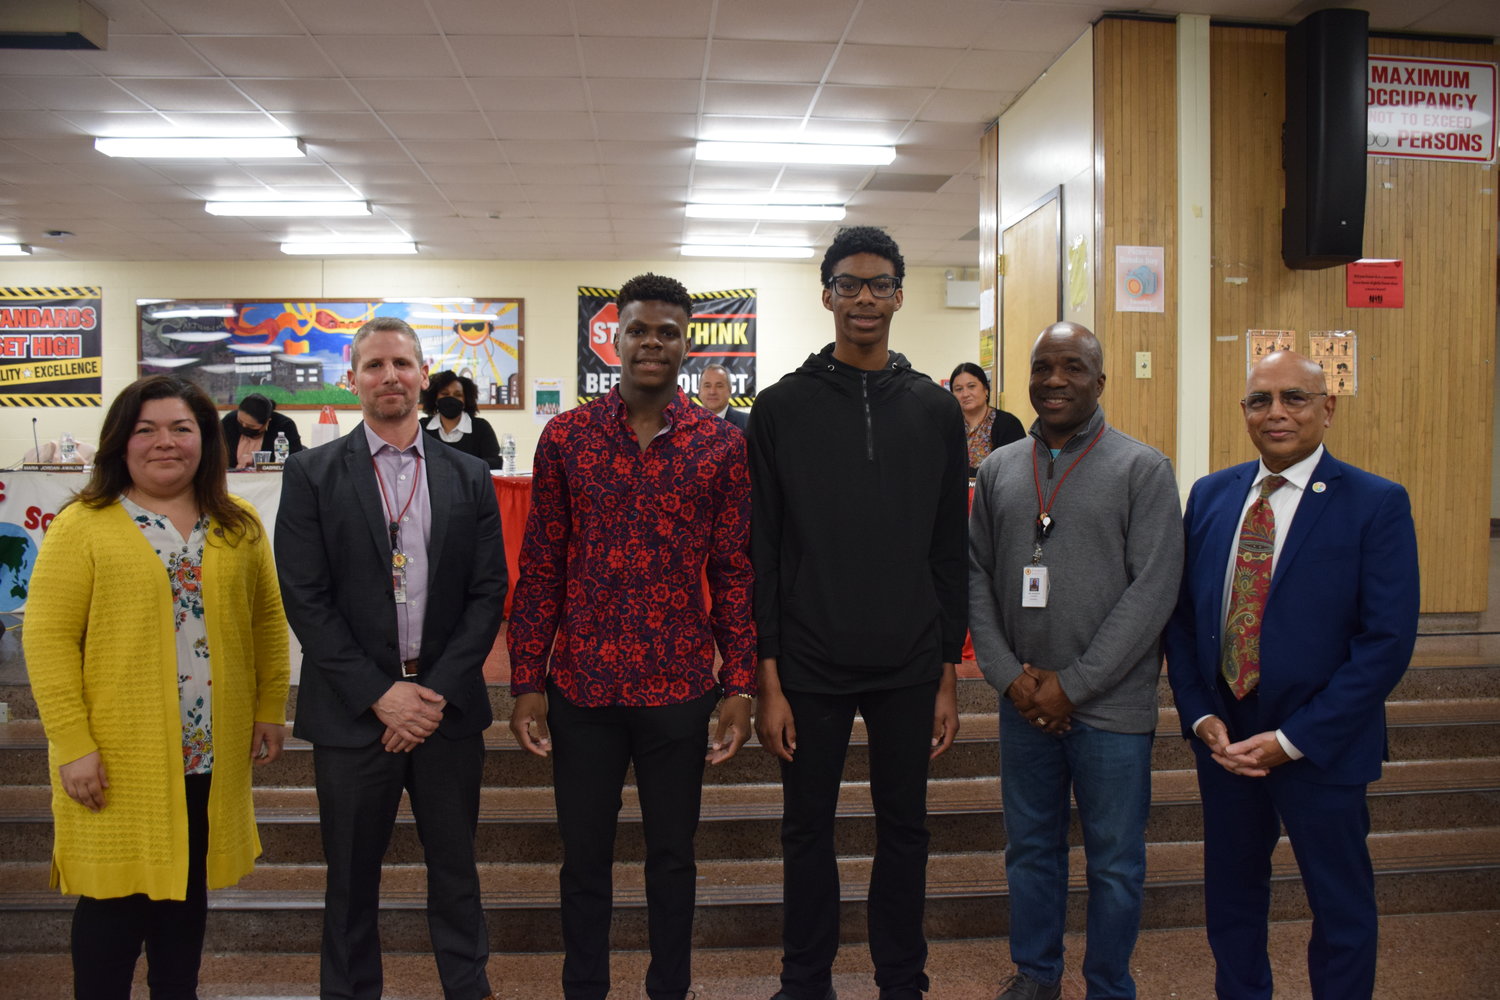 Freeport boys track team members Kazeem Scott (right center), Dorian Boyd (left center) and coach Charles Gilreath (second right) were acknowledged for their outstanding winter sports season by Superintendent of Schools, Dr. Kishore Kuncham (right), Board of Education President Maria-Jordan Awalom (left) and Director of Health, Physical Education and Athletics Jonathan Bloom.